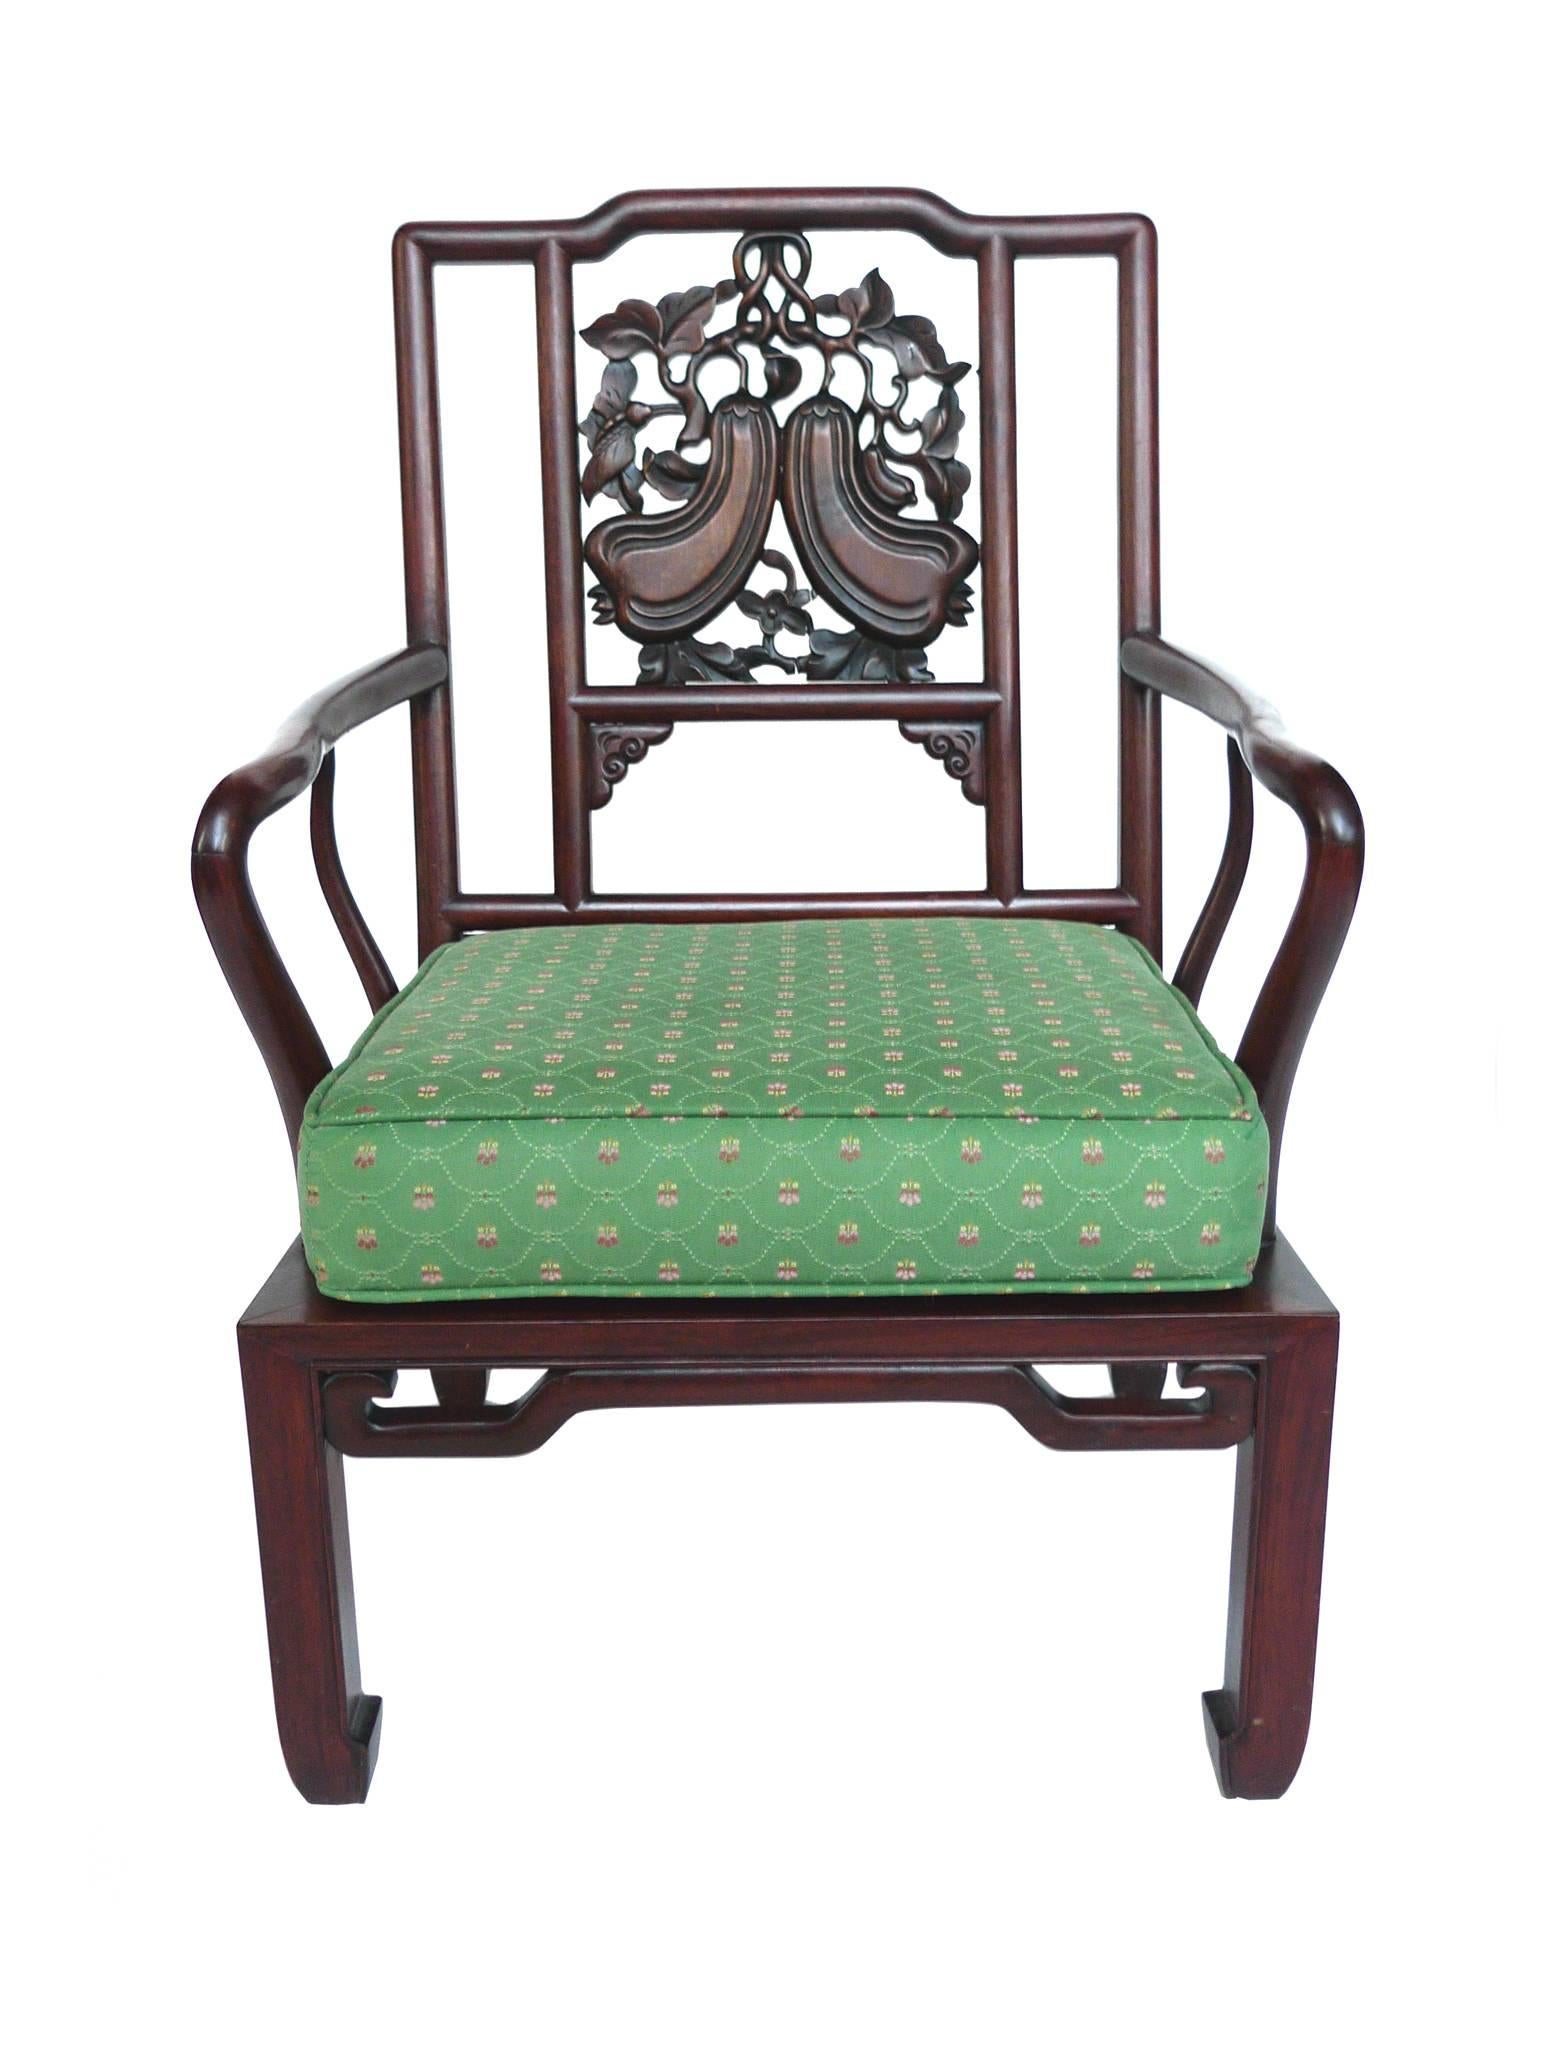 These Chinese armchairs consist of rosewood. The wood is a warm reddish brown. It's beautifully carved with slender, curved arms and a low, geometric seat. The back's design features carved gourds, a symbol of good fortune. The seat cushion is a